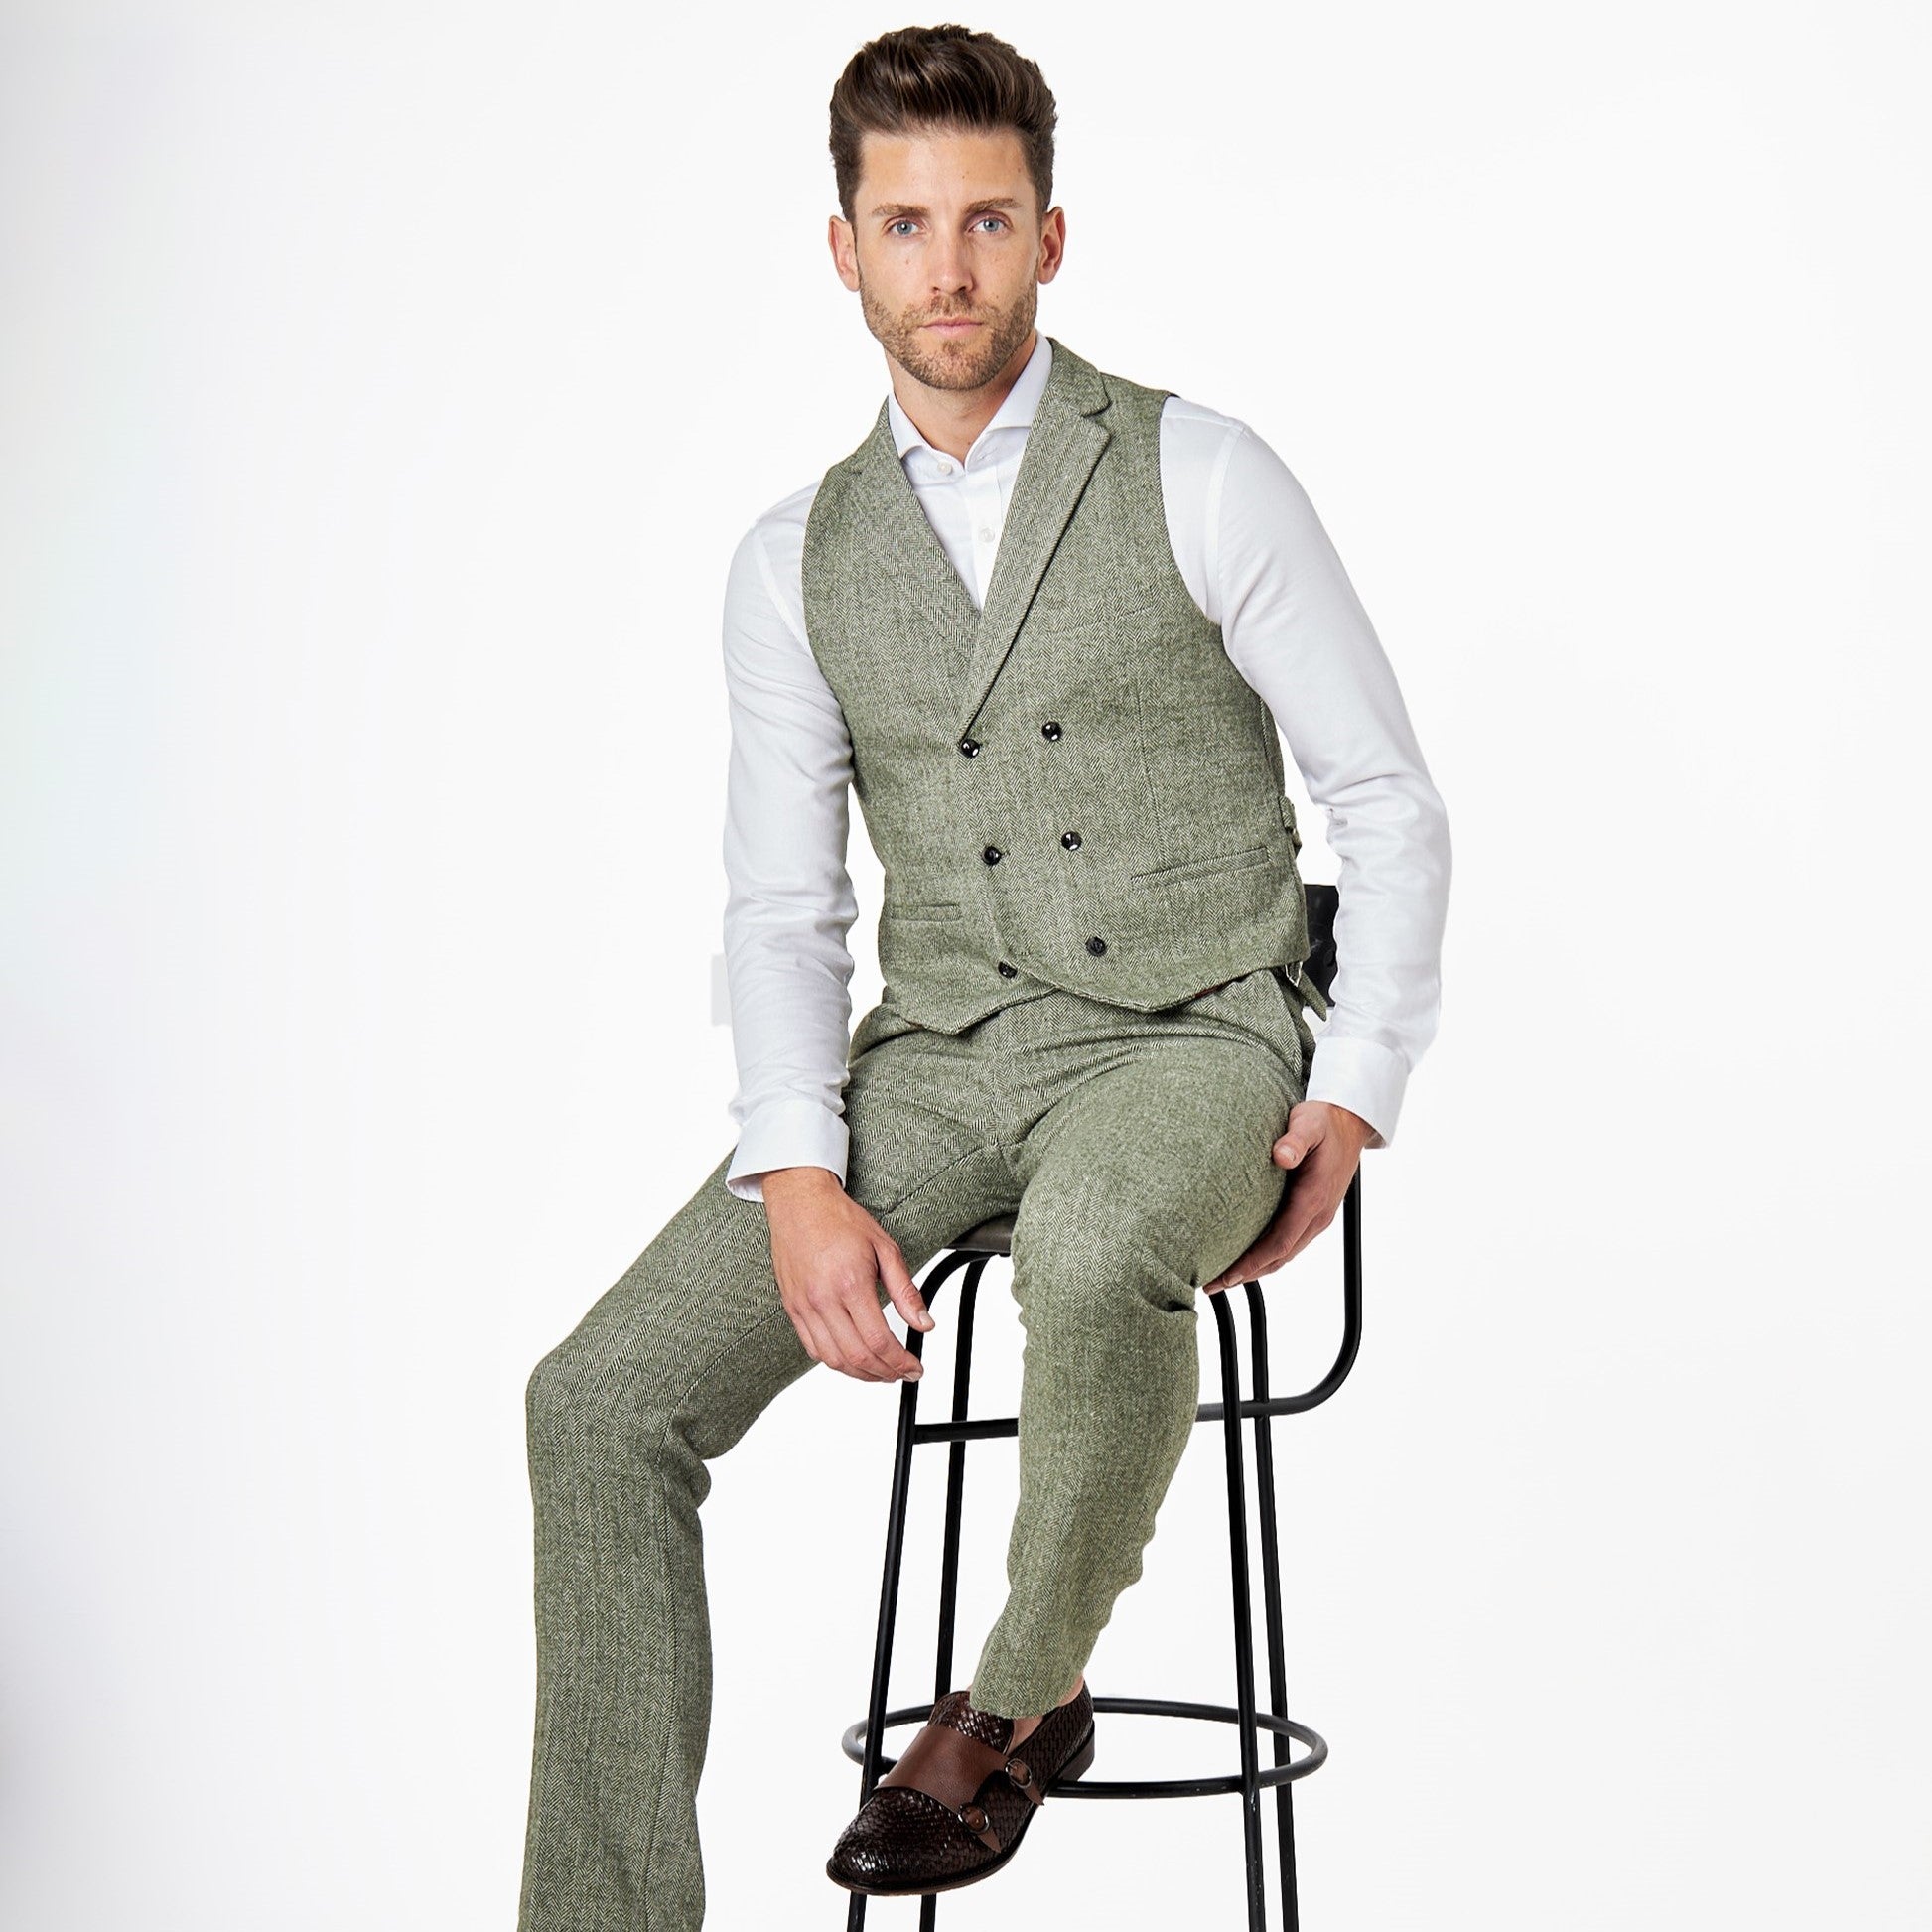 How to wear a double-breasted waistcoat